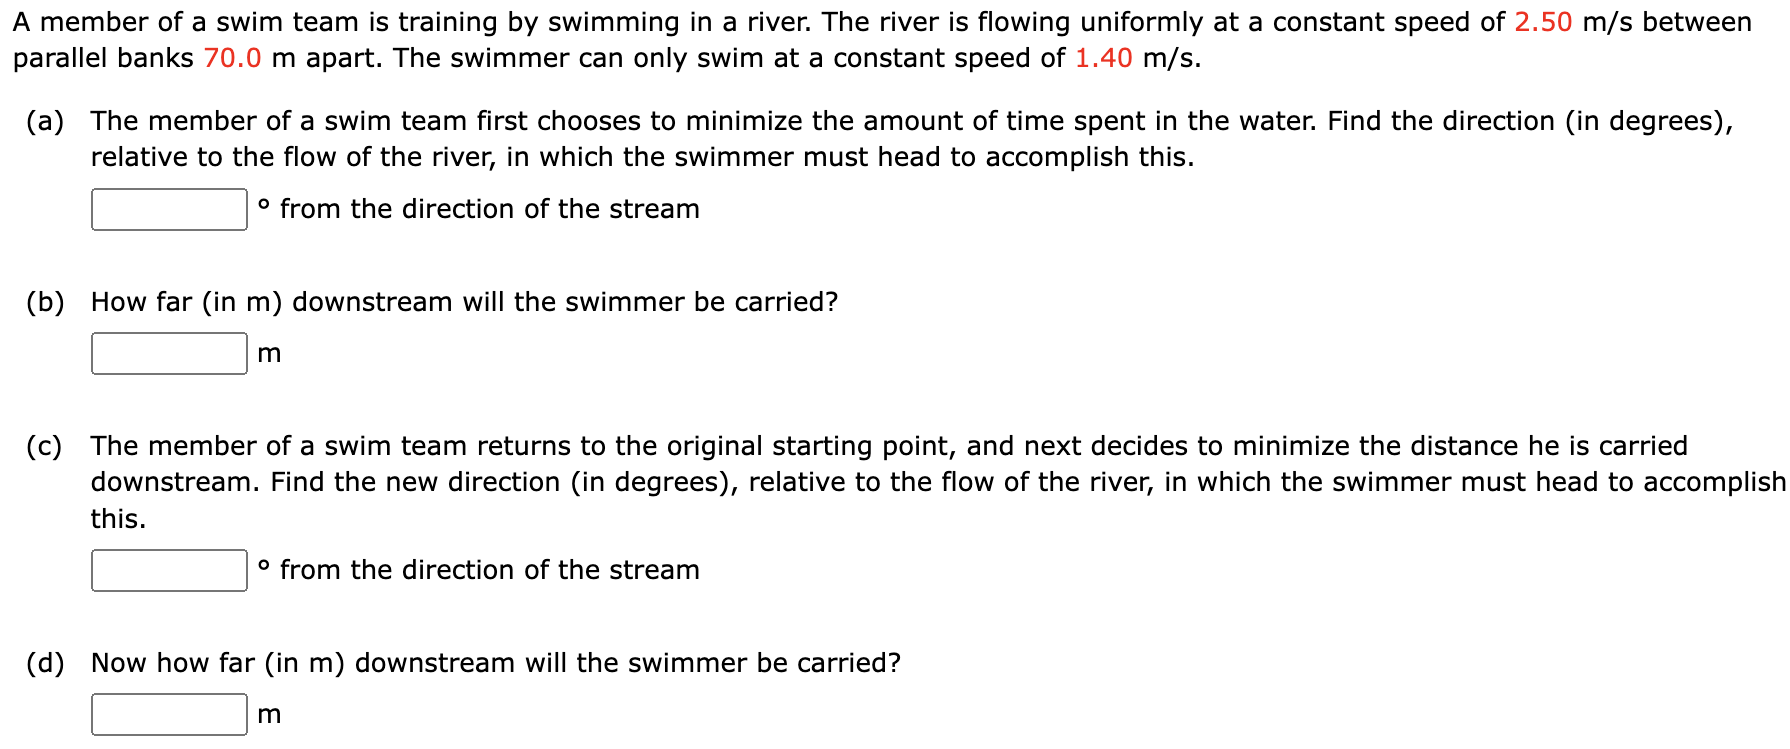 A member of a swim team is training by swimming in a river. The river is flowing uniformly at a constant speed of 2.50 m/s between parallel banks 70.0 m apart. The swimmer can only swim at a constant speed of 1.40 m/s. (a) The member of a swim team first chooses to minimize the amount of time spent in the water. Find the direction (in degrees), relative to the flow of the river, in which the swimmer must head to accomplish this. ० from the direction of the stream (b) How far (in m) downstream will the swimmer be carried? m (c) The member of a swim team returns to the original starting point, and next decides to minimize the distance he is carried downstream. Find the new direction (in degrees), relative to the flow of the river, in which the swimmer must head to accomplish this. ० from the direction of the stream (d) Now how far (in m) downstream will the swimmer be carried? m